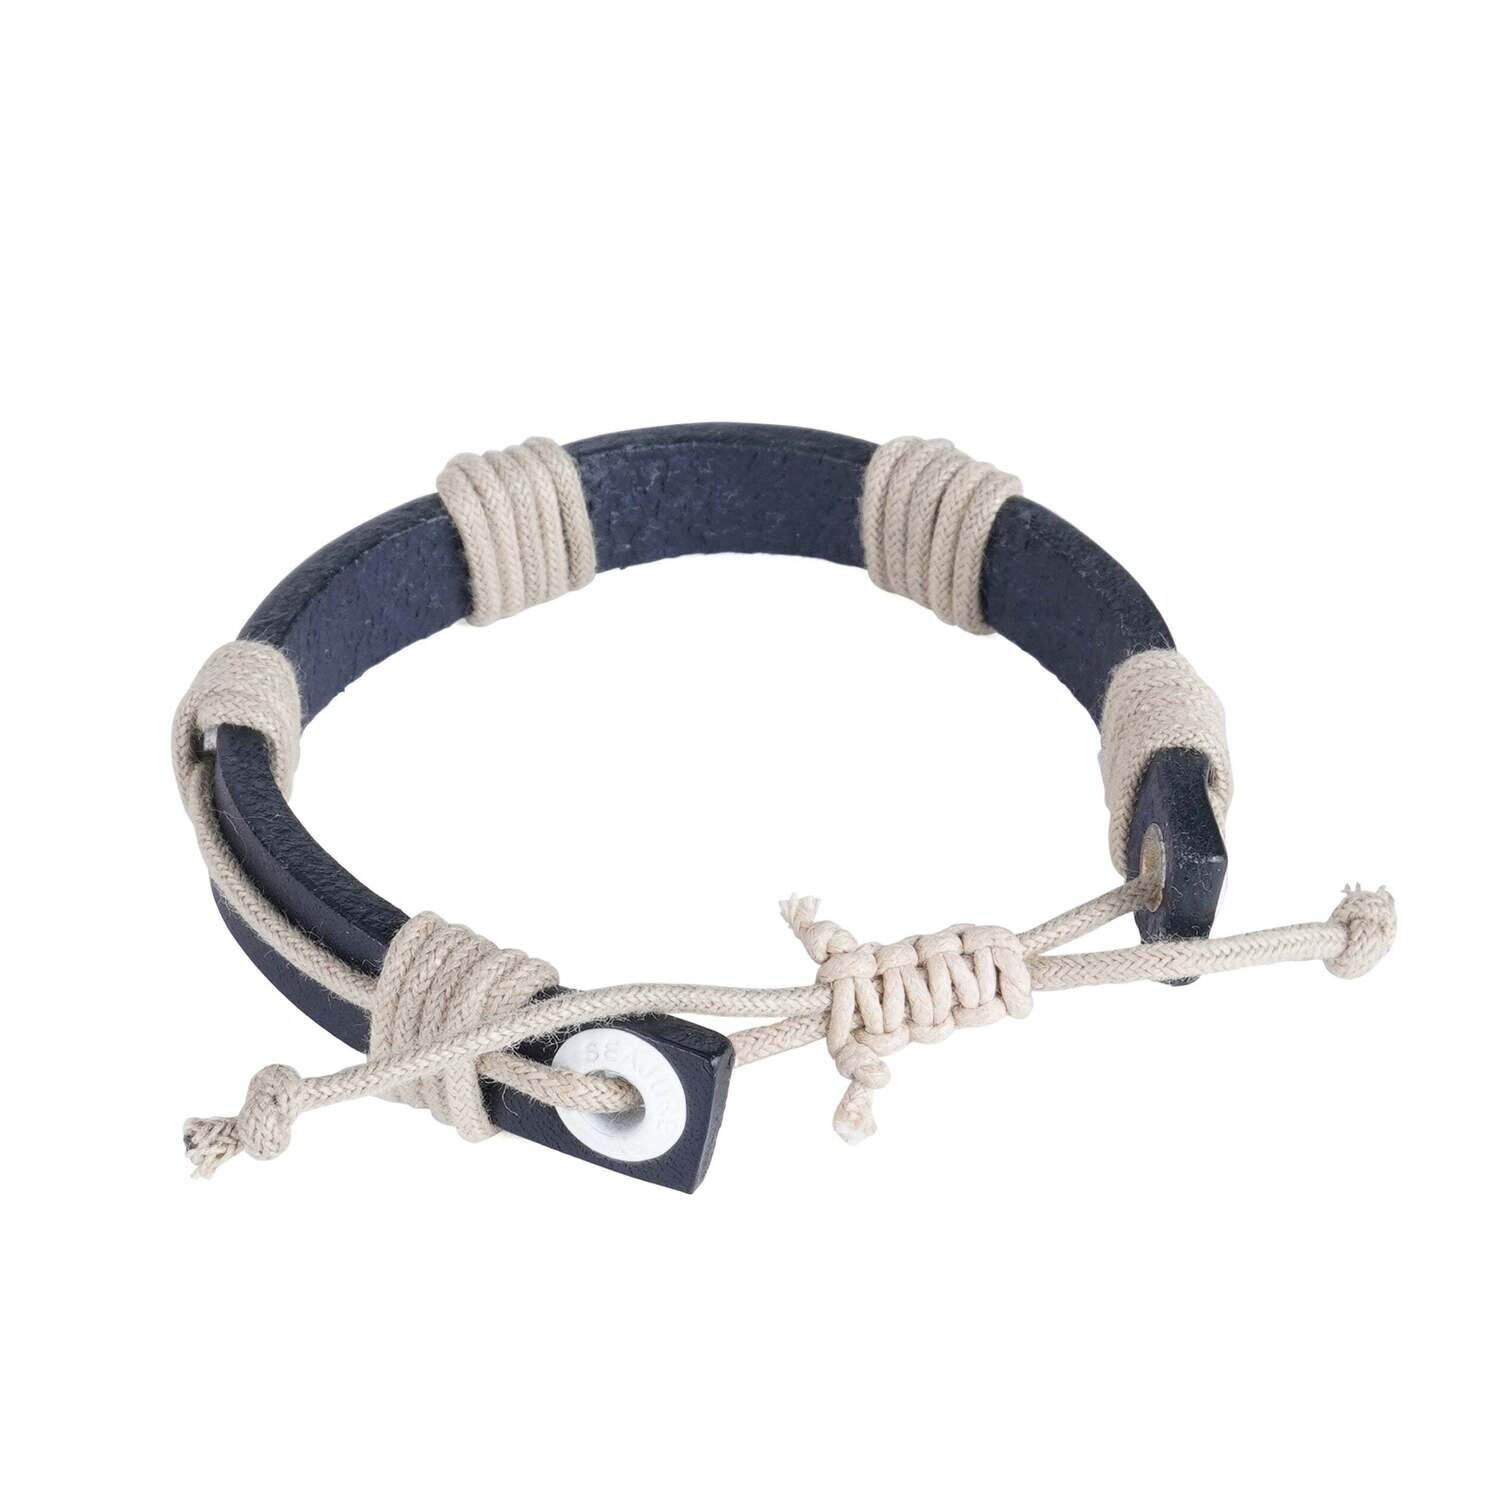 Nautical Rope and Leather Motuo Bracelet